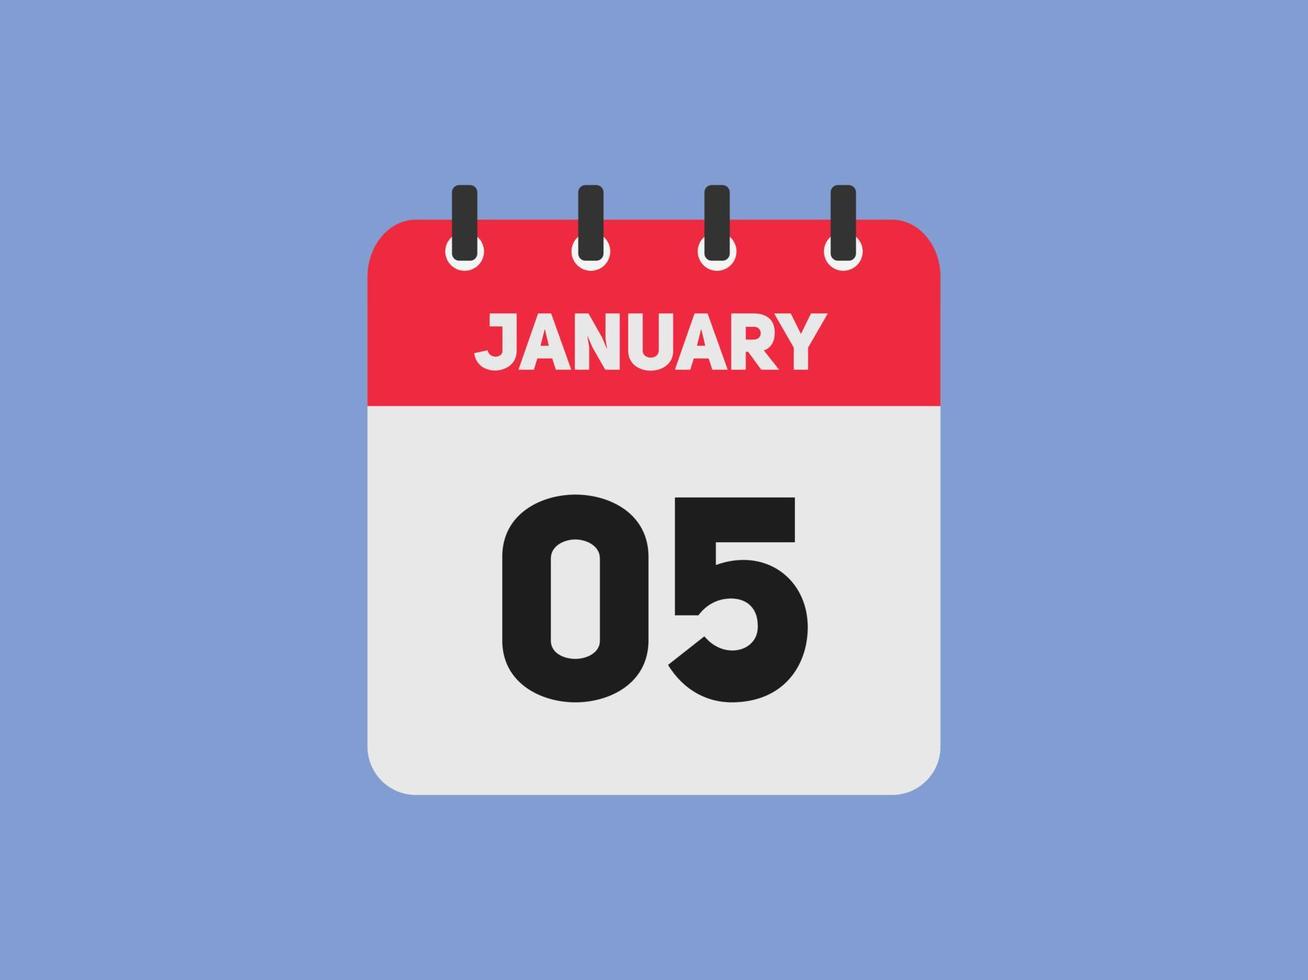 january 5 calendar reminder. 5th january daily calendar icon template. Calendar 5th january icon Design template. Vector illustration